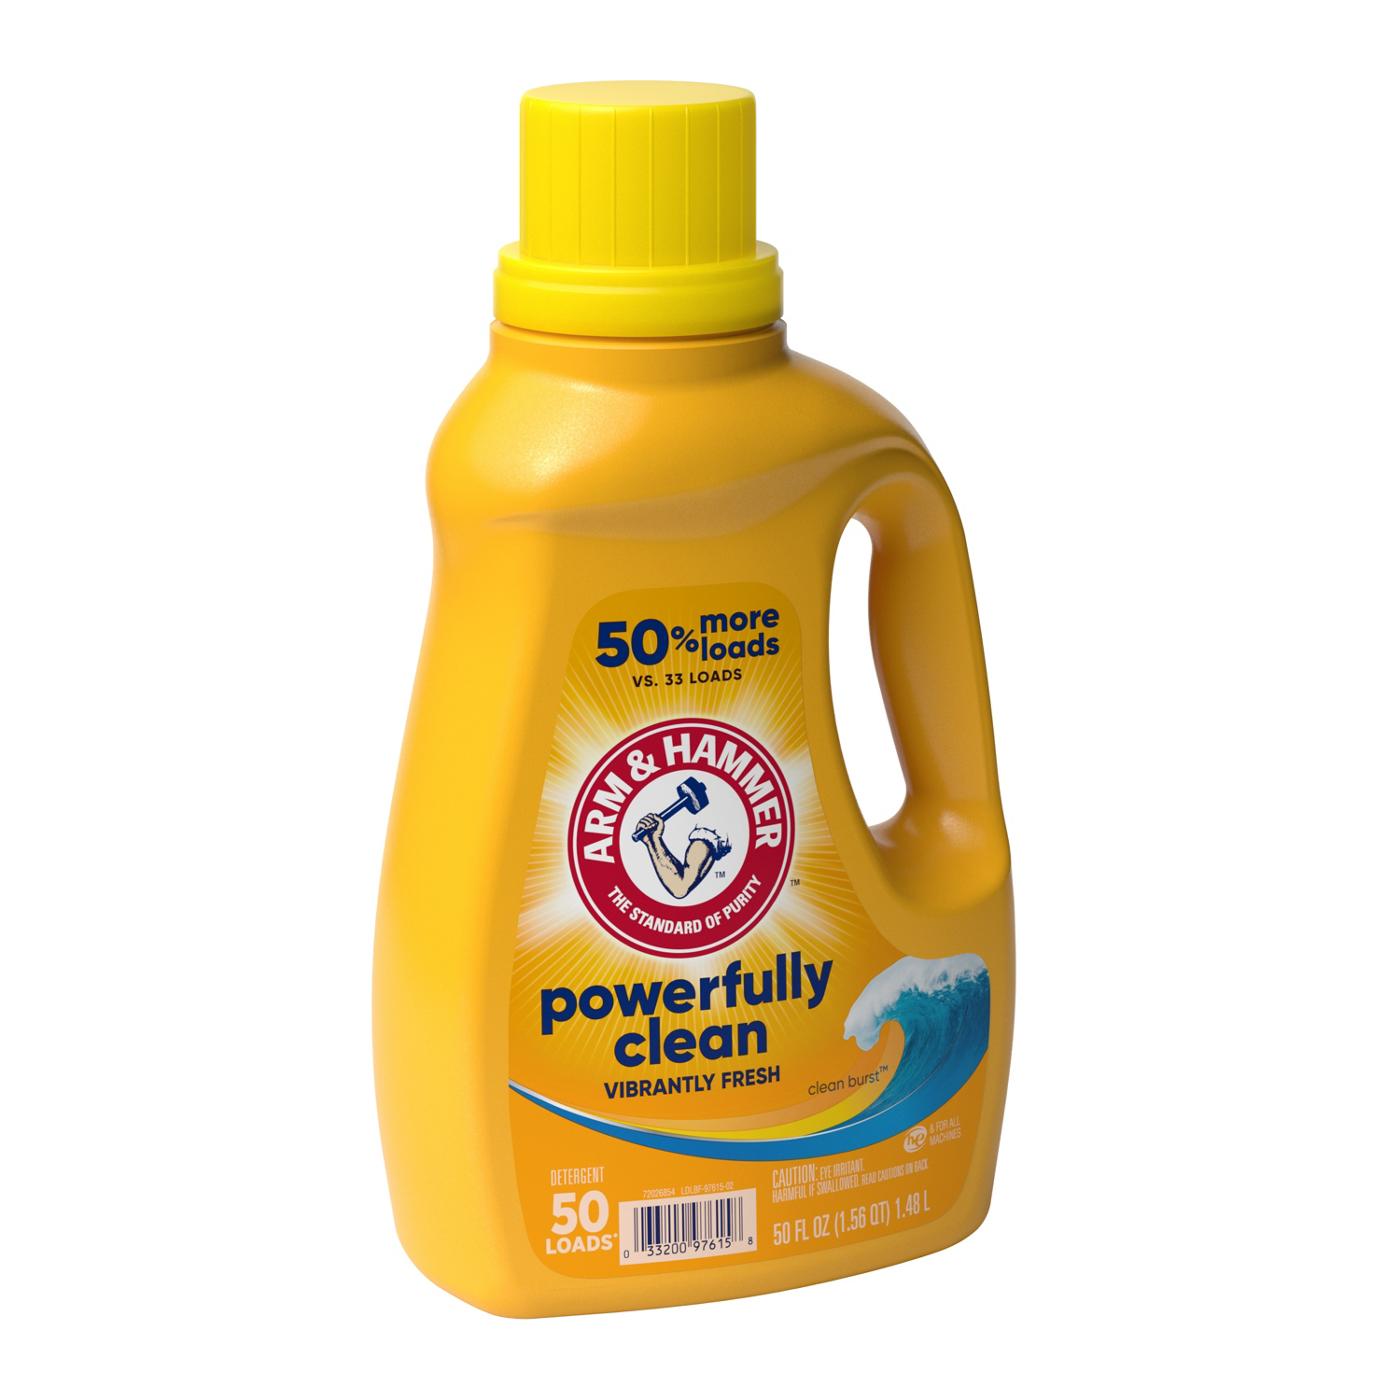 Arm & Hammer Powerfully Clean HE Liquid Laundry Detergent, 50 Loads - Clean Burst; image 4 of 4